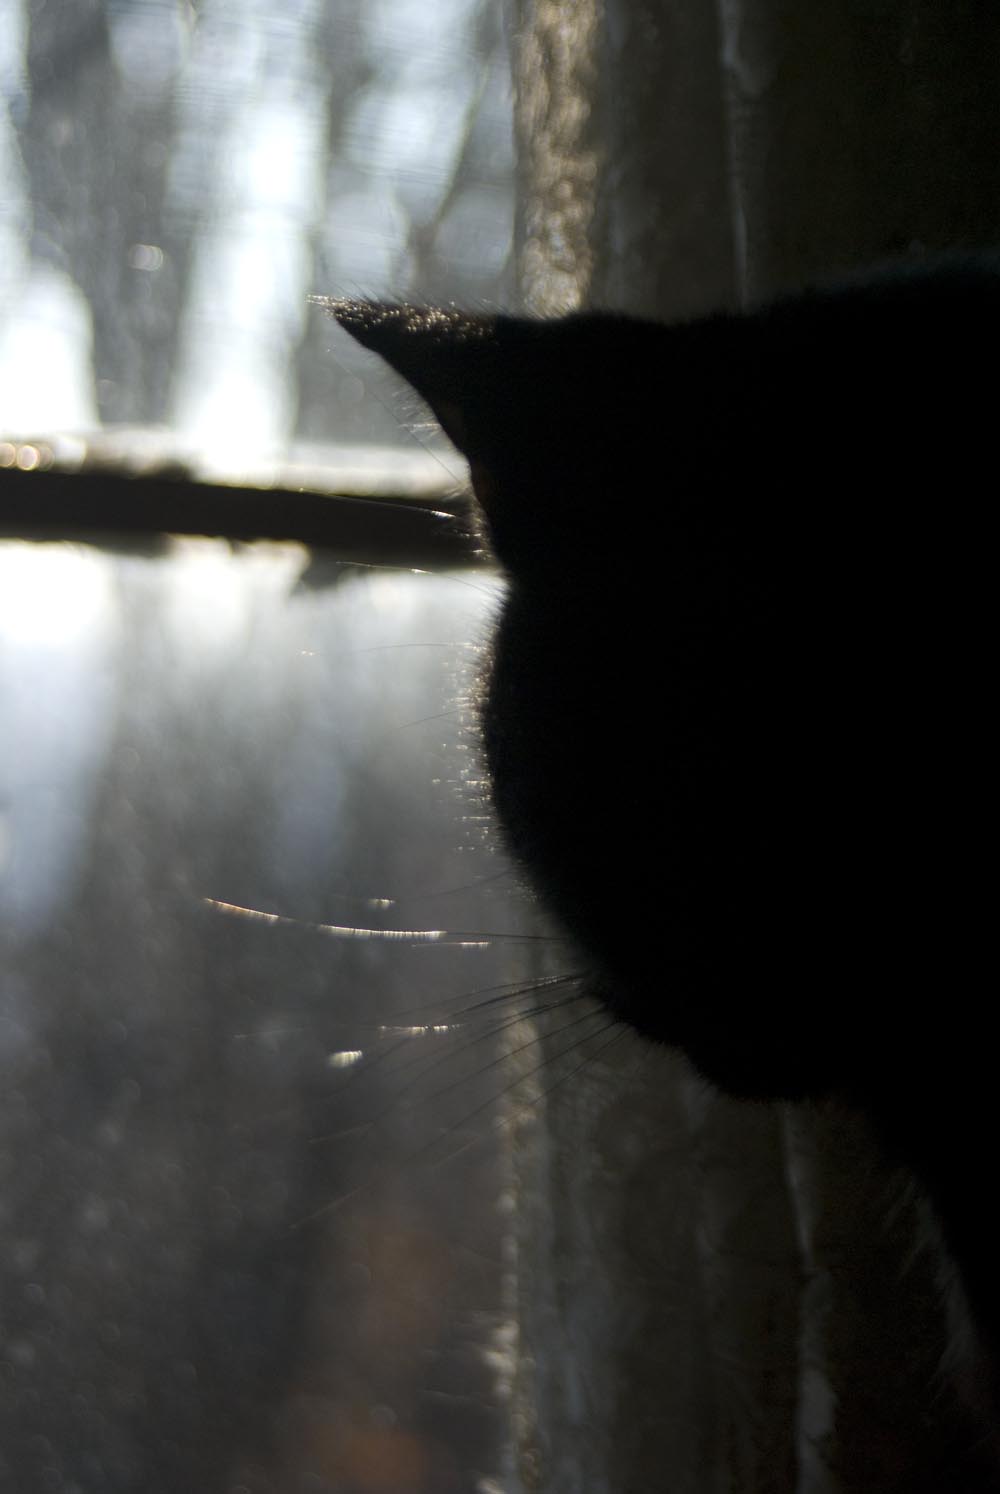 black cat looking out window